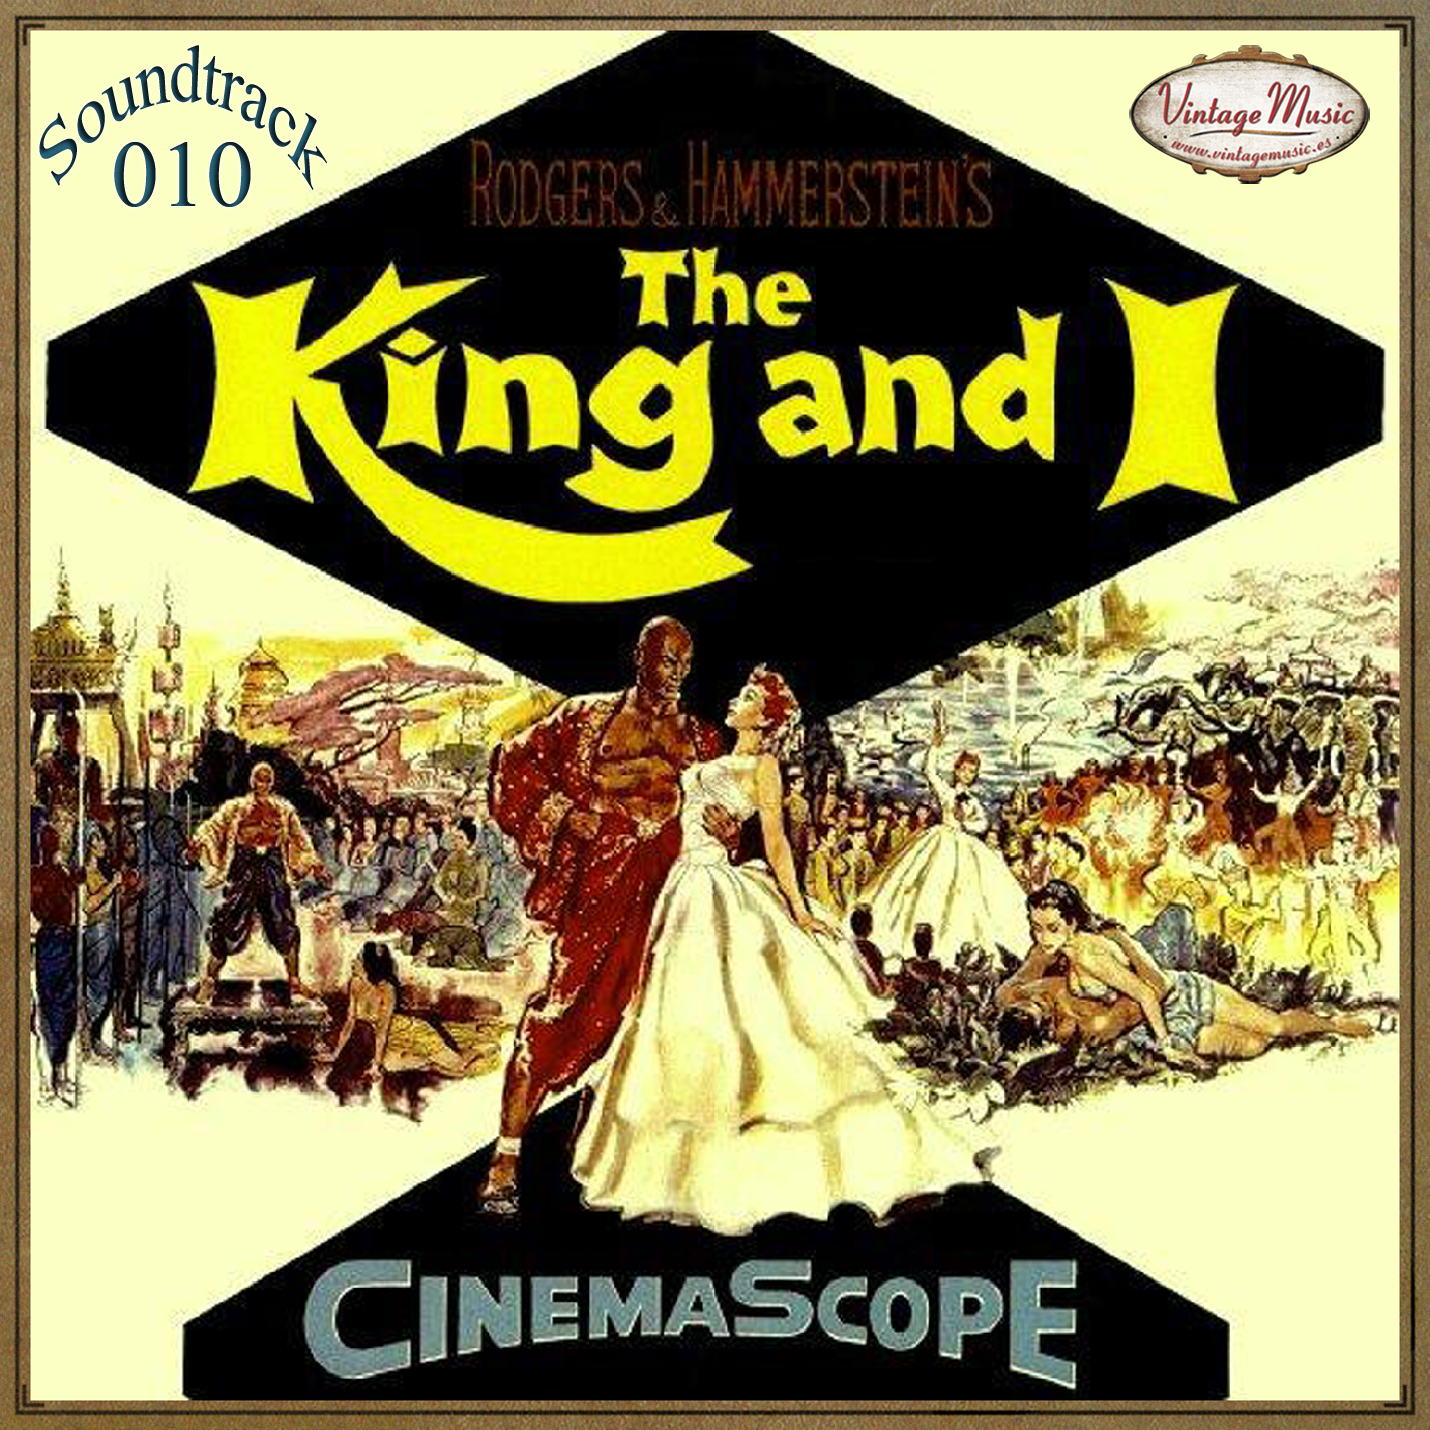 The King And I(Colección Soundtrack - #10)